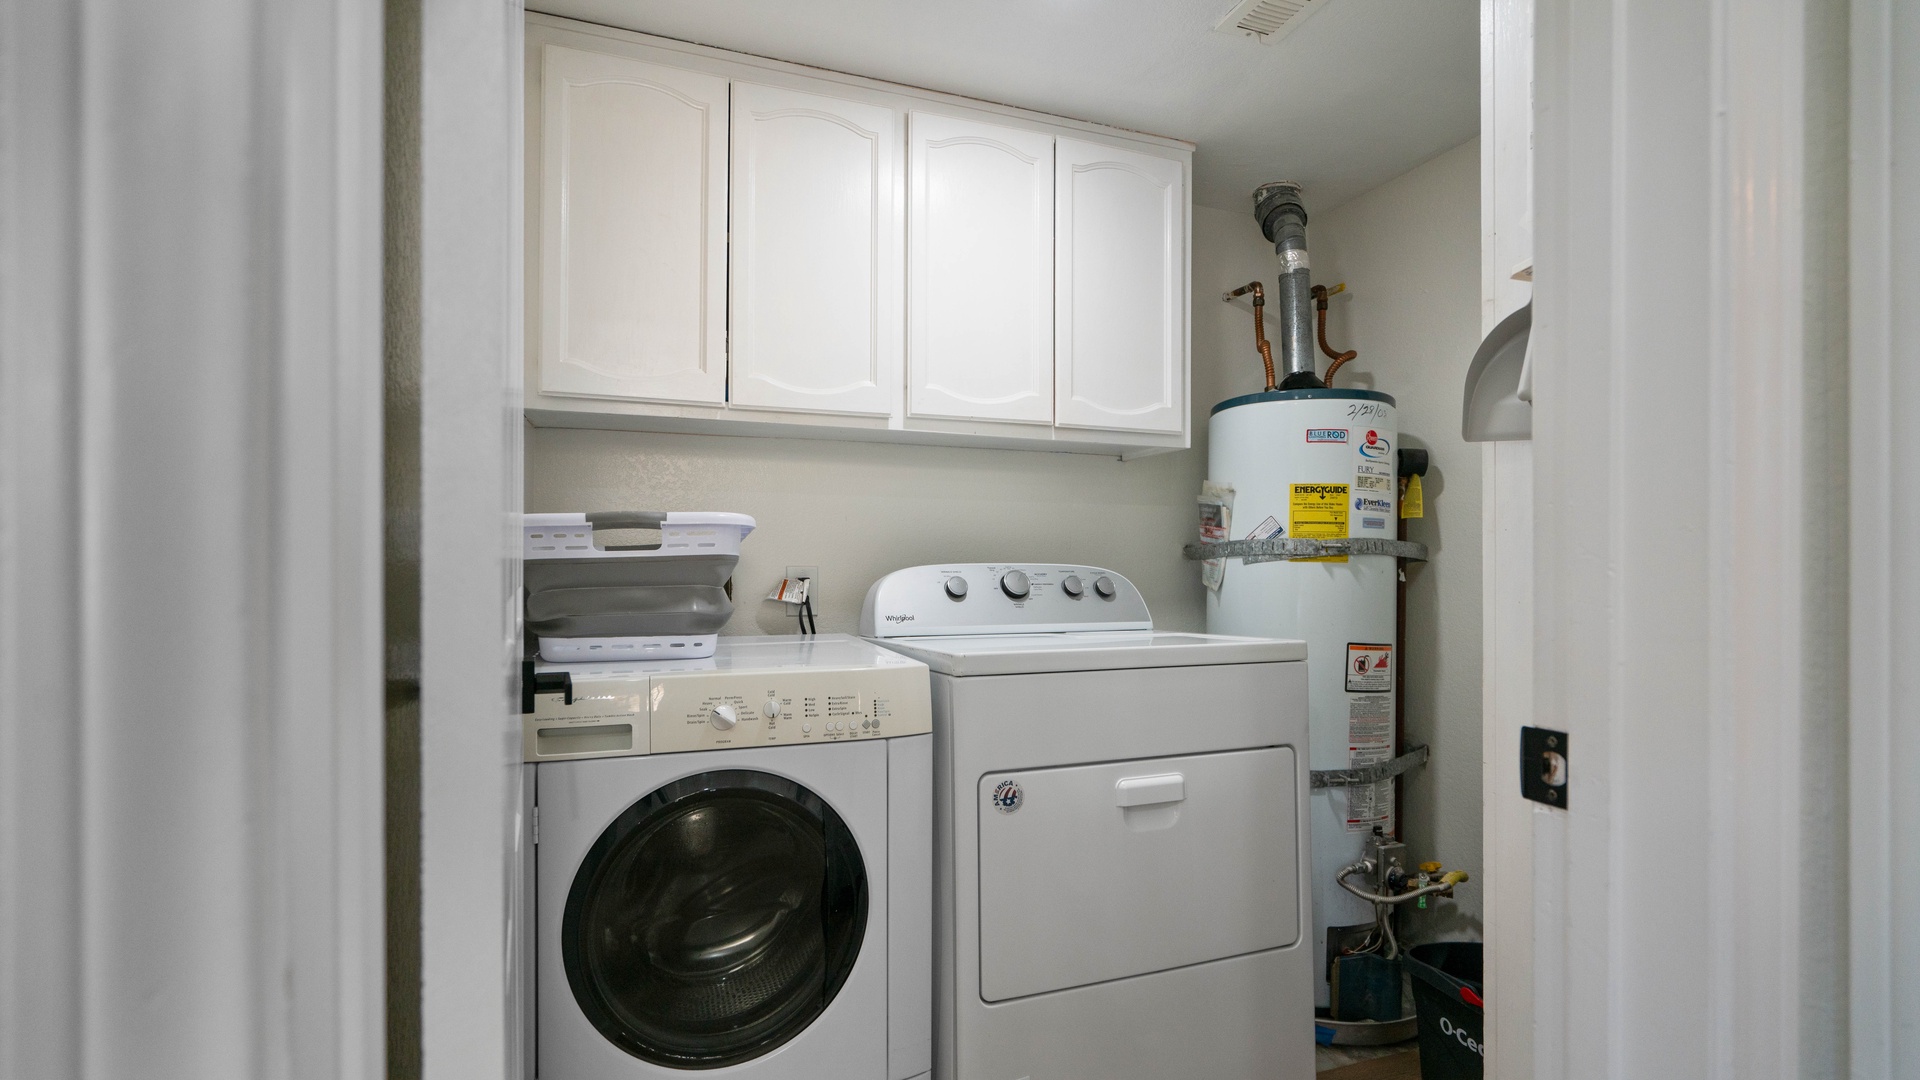 Washer and dryer with complimentary detergent